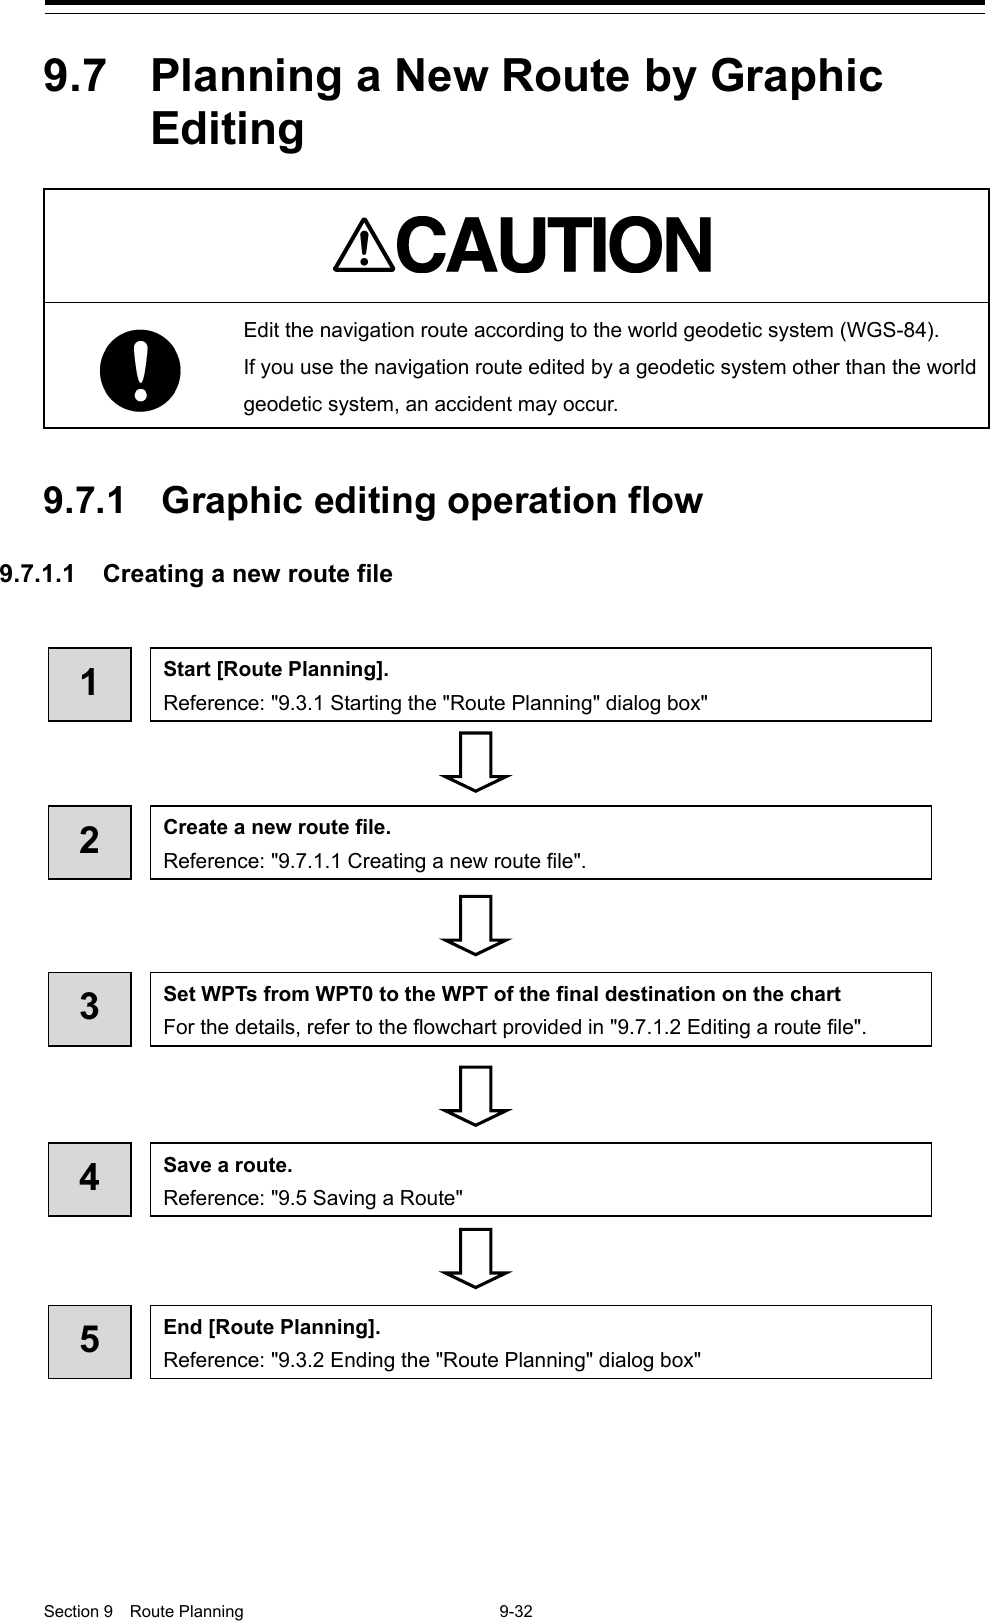  Section 9  Route Planning  9-32  9.7  Planning a New Route by Graphic Editing    Edit the navigation route according to the world geodetic system (WGS-84). If you use the navigation route edited by a geodetic system other than the world geodetic system, an accident may occur.   9.7.1 Graphic editing operation flow  9.7.1.1 Creating a new route file    1 Start [Route Planning]. Reference: &quot;9.3.1 Starting the &quot;Route Planning&quot; dialog box&quot; 2 Create a new route file. Reference: &quot;9.7.1.1 Creating a new route file&quot;.  3 Set WPTs from WPT0 to the WPT of the final destination on the chart For the details, refer to the flowchart provided in &quot;9.7.1.2 Editing a route file&quot;.  4 Save a route. Reference: &quot;9.5 Saving a Route&quot;    5 End [Route Planning]. Reference: &quot;9.3.2 Ending the &quot;Route Planning&quot; dialog box&quot;    